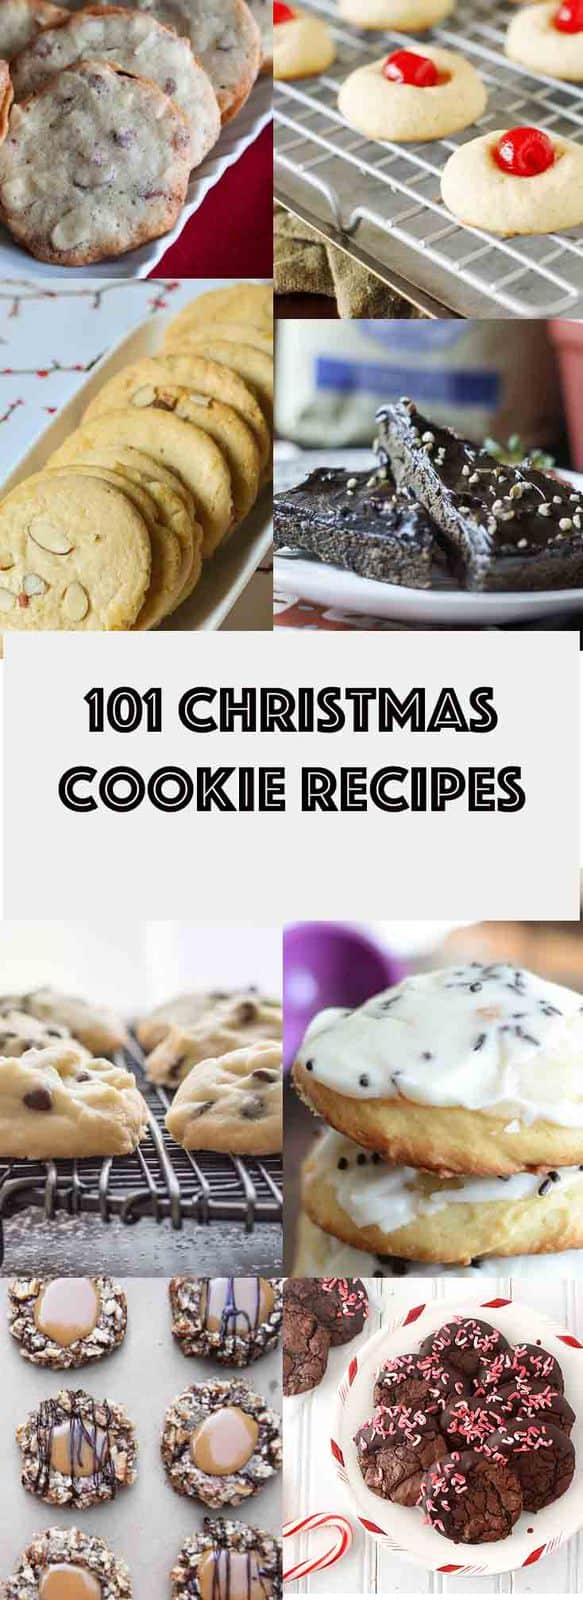 Here are 101 Christmas Cookie Recipes You Can't Resist! 